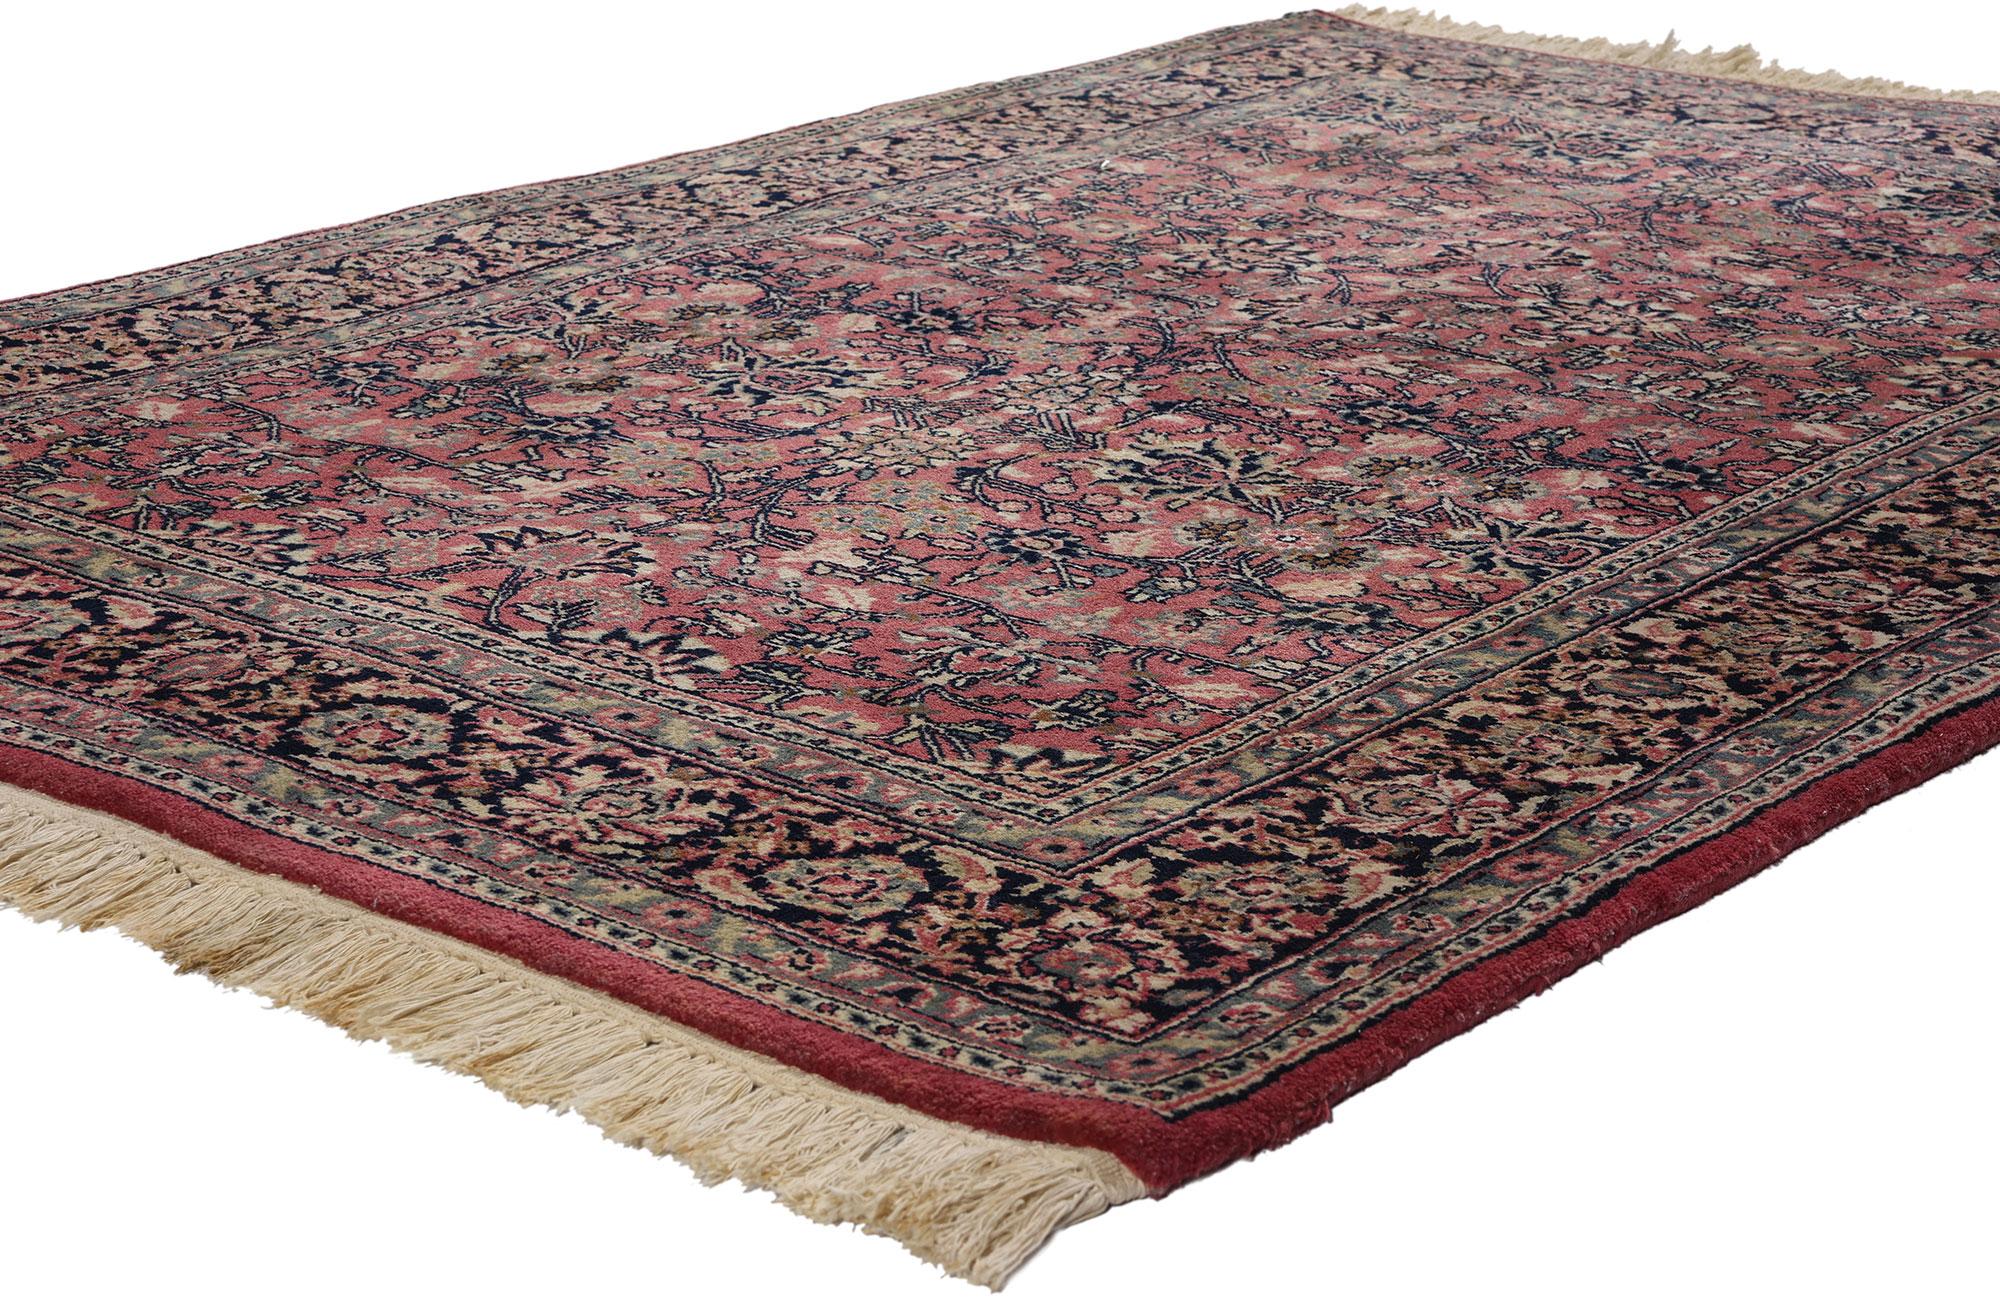 78693 Vintage Red Persian Bijar Rug, 04'01 x 06'00. Persian Bijar rugs are intricately woven rugs originating from the town of Bijar in western Iran, renowned for their durability and robustness. Crafted by skilled Kurdish artisans using a